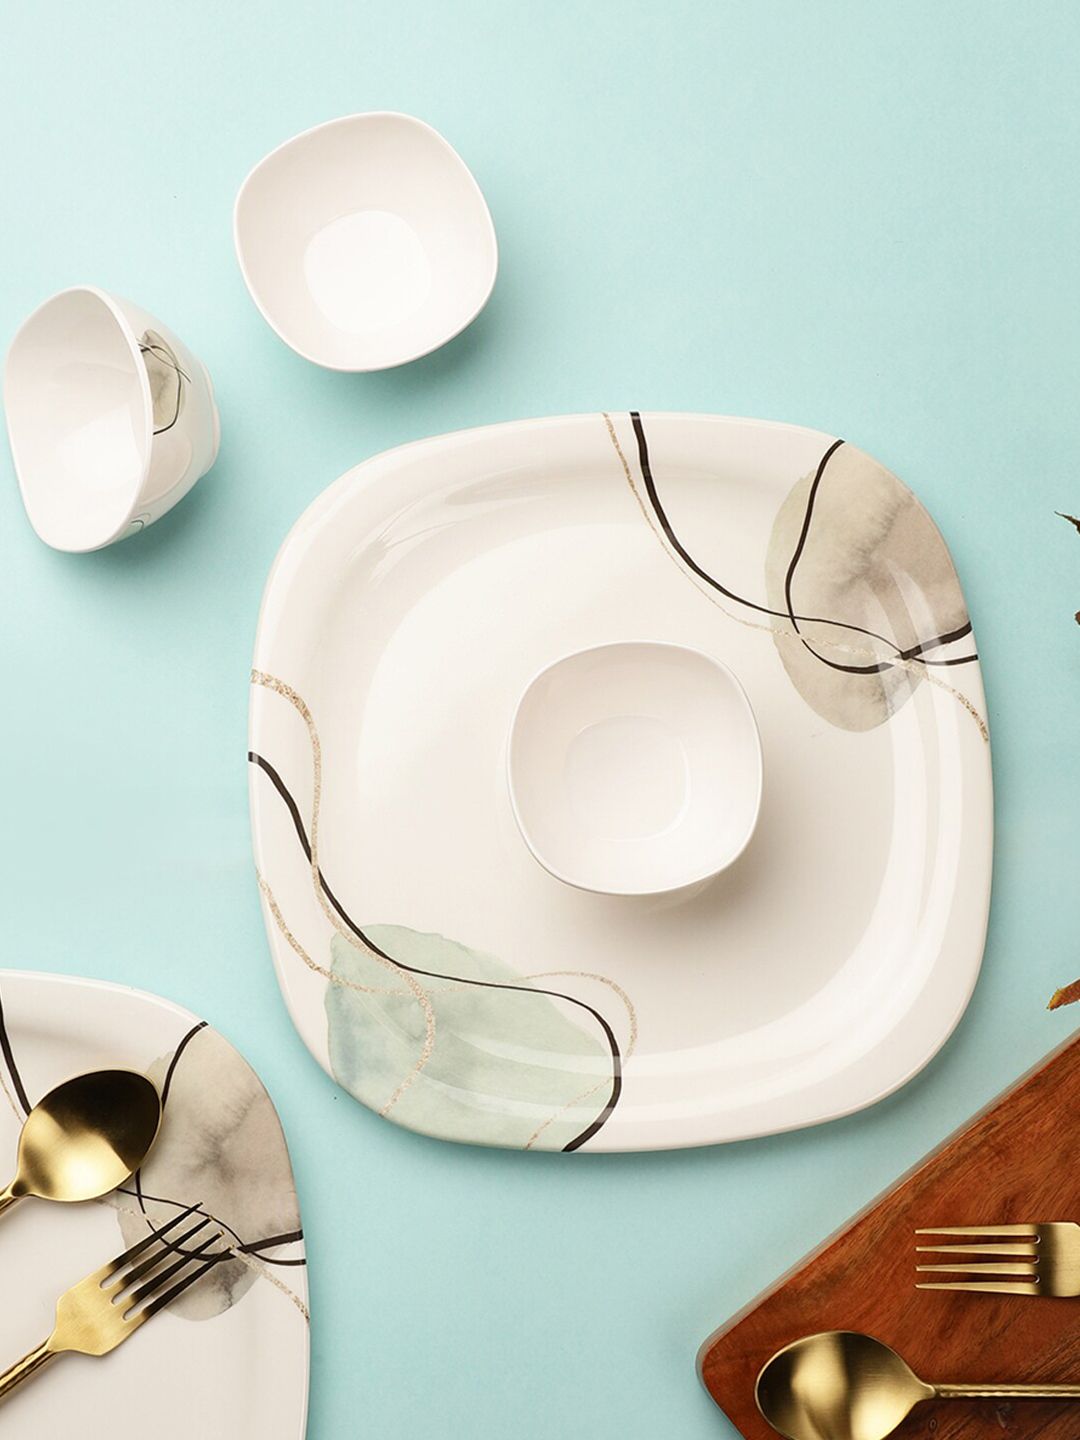 Servewell White & Green Pieces Geometric Printed Melamine Glossy Dinner Set Price in India